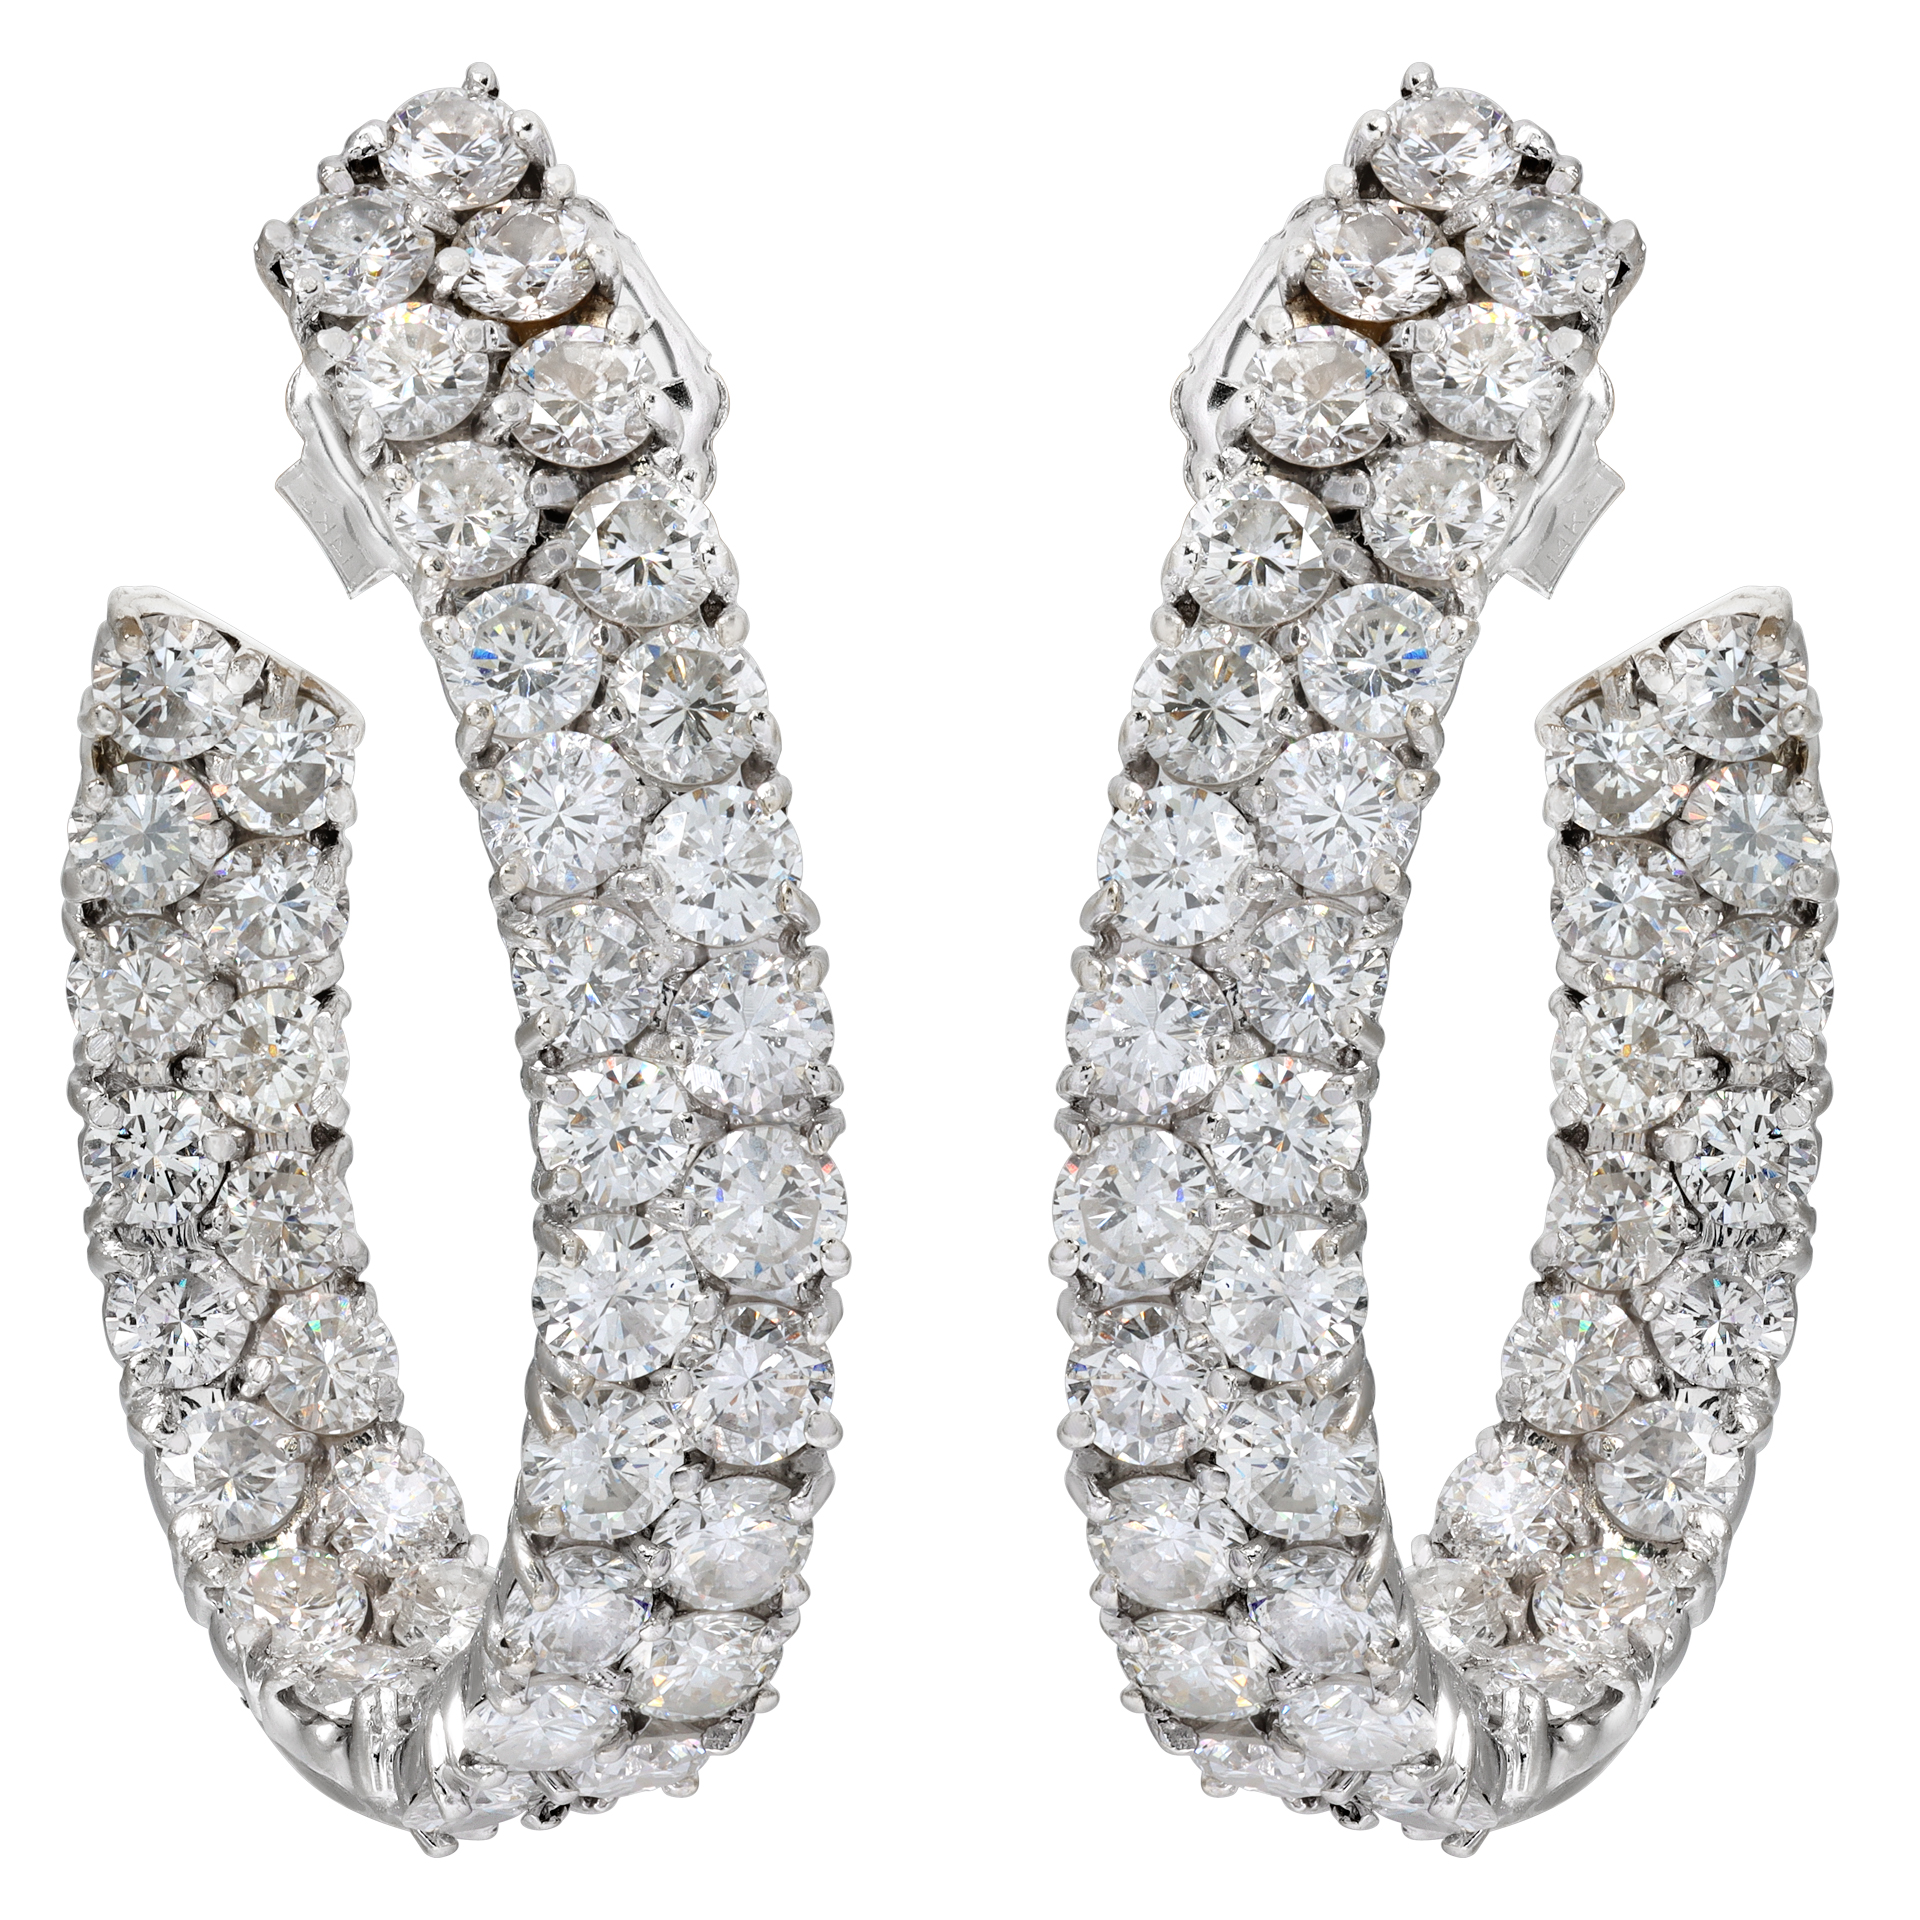 Inside Out Oval Shape Hoops Earrings With Double Row Of Diamonds In 18k White Gold. Diamonds Approx. Total 12.00 Carats.